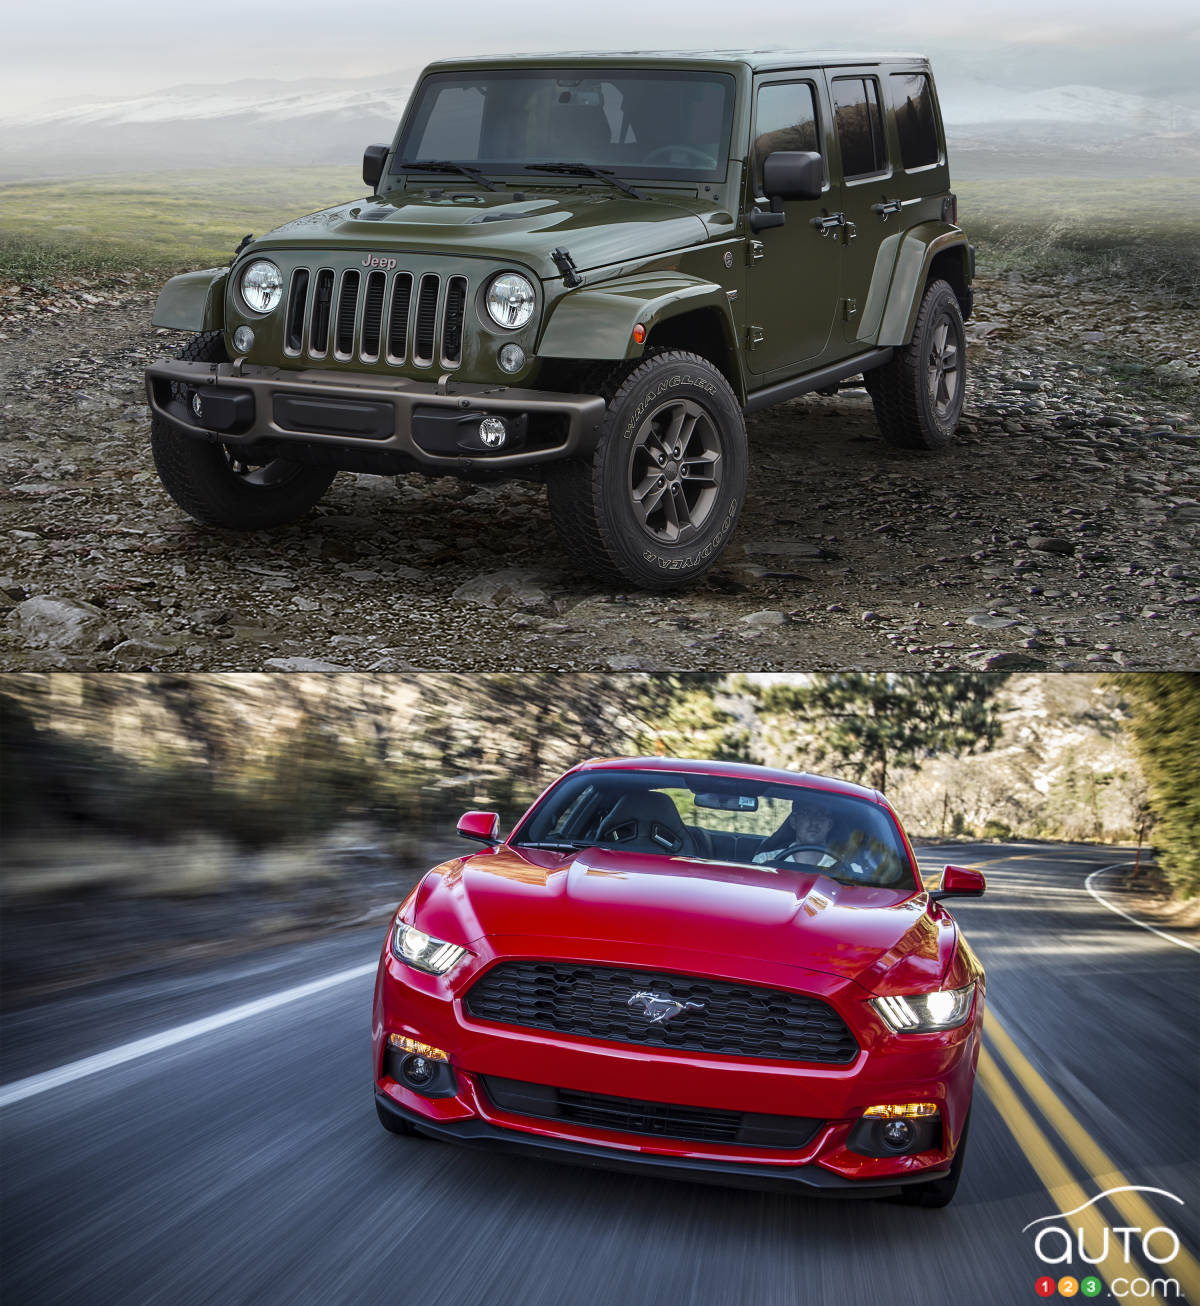 2016 Ford Mustang Convertible vs. Jeep Wrangler Unlimited | Car Reviews |  Auto123